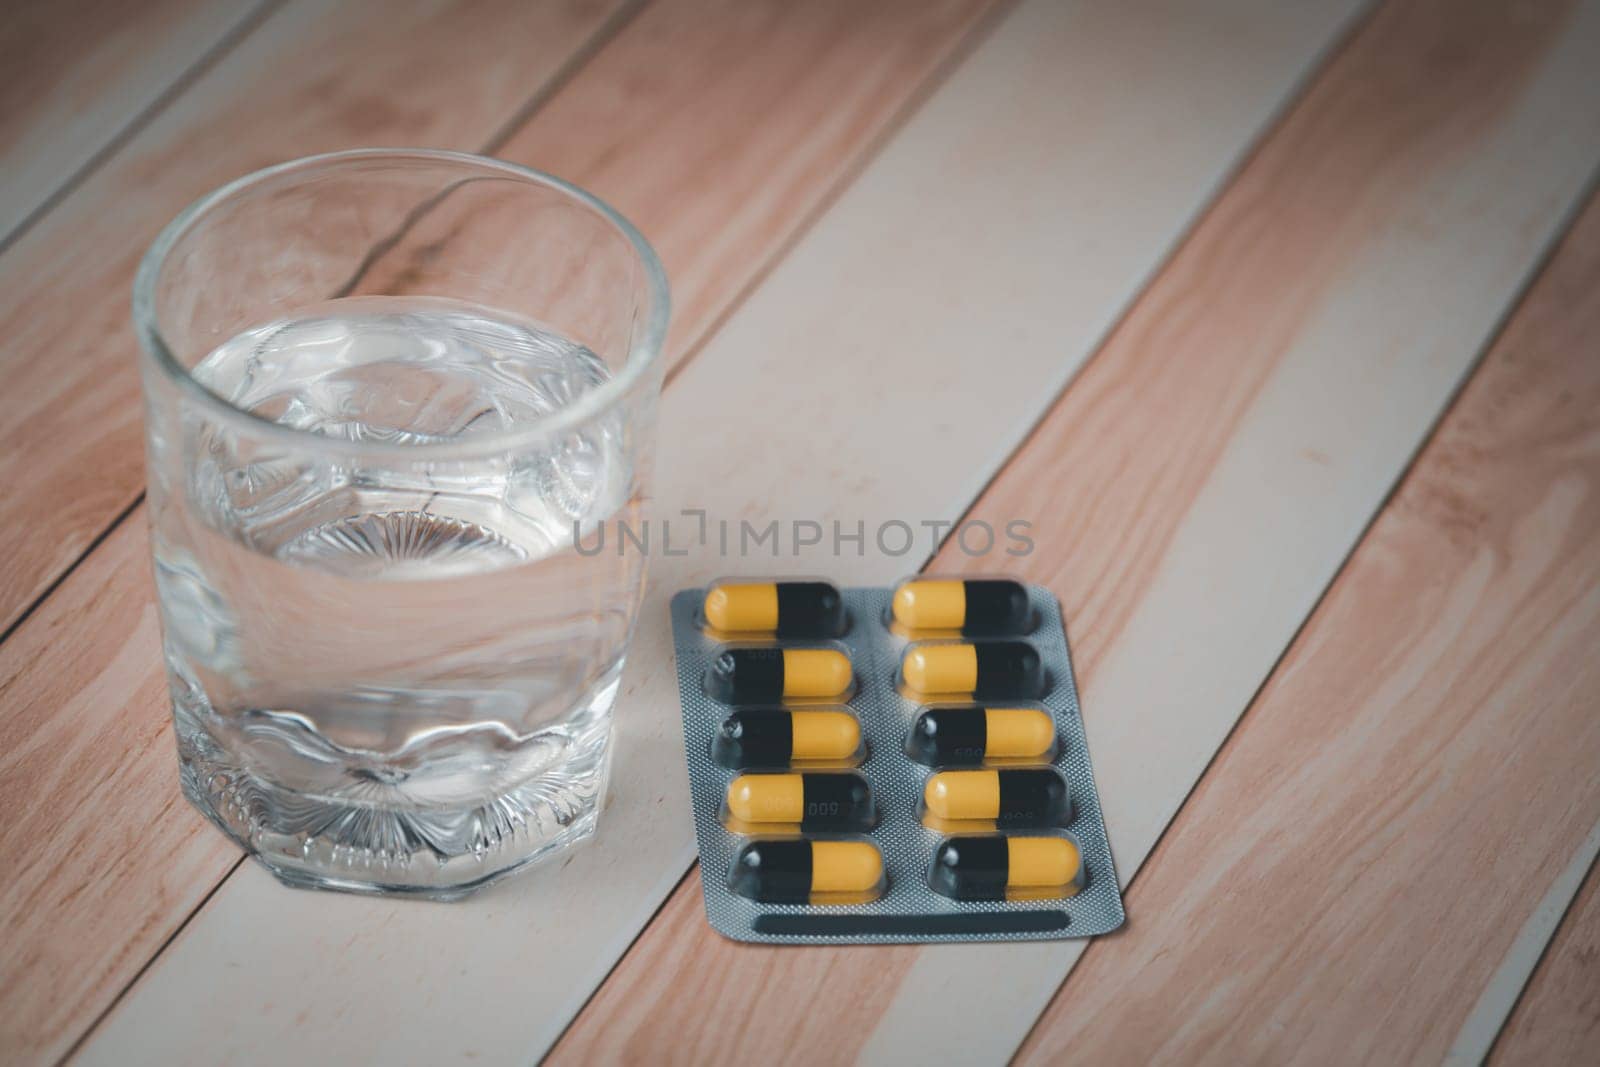 A glass of water and a blister pack of pills, essential for medication, rest on a wooden table, indicating health care routine or treatment